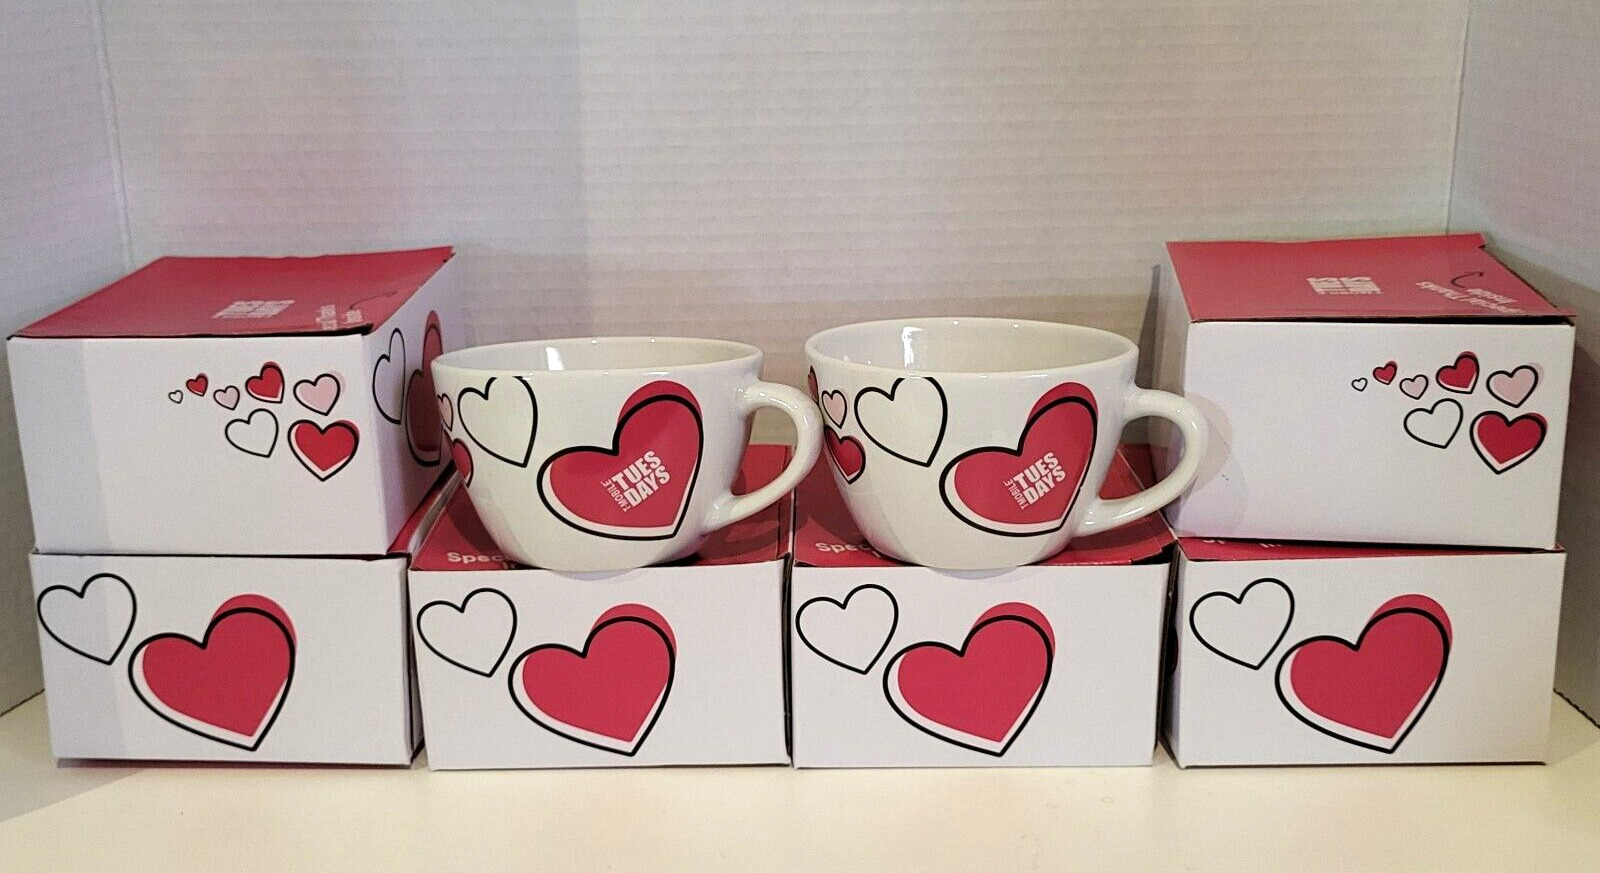 (Lot of 6) 8oz Mugs For Coffee, Tea, Is Tuesdays Yet? From T-Mobile